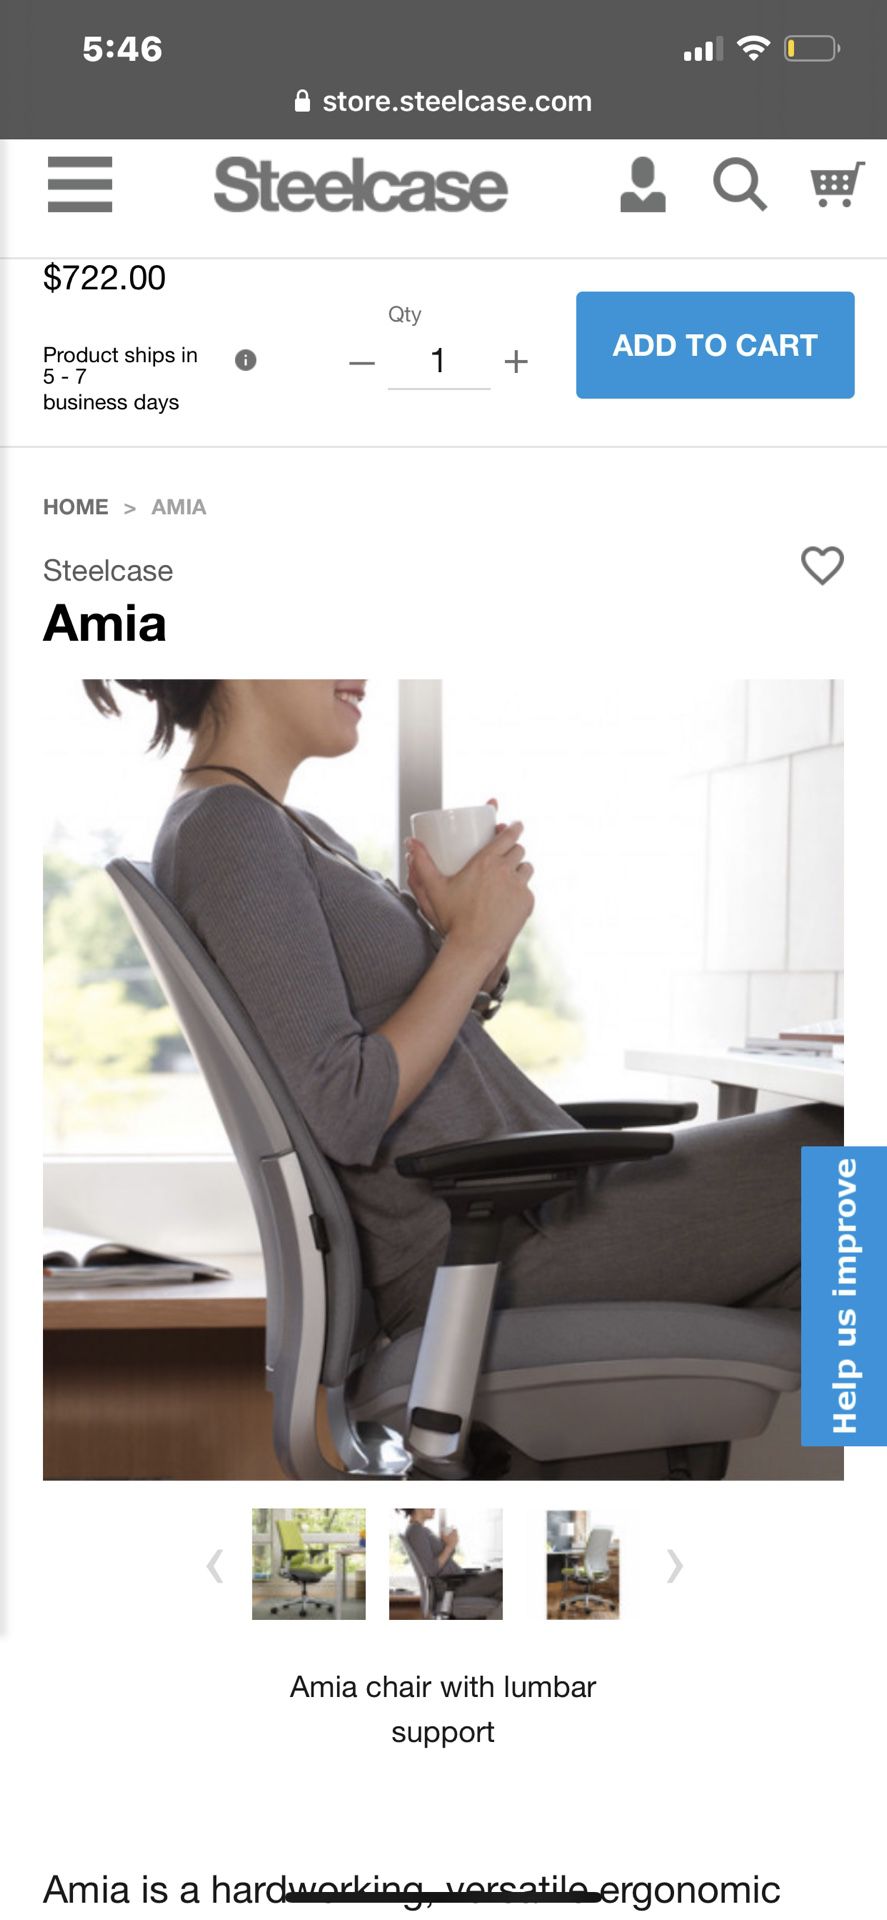 Steelcase Amia office chair with lumbar support